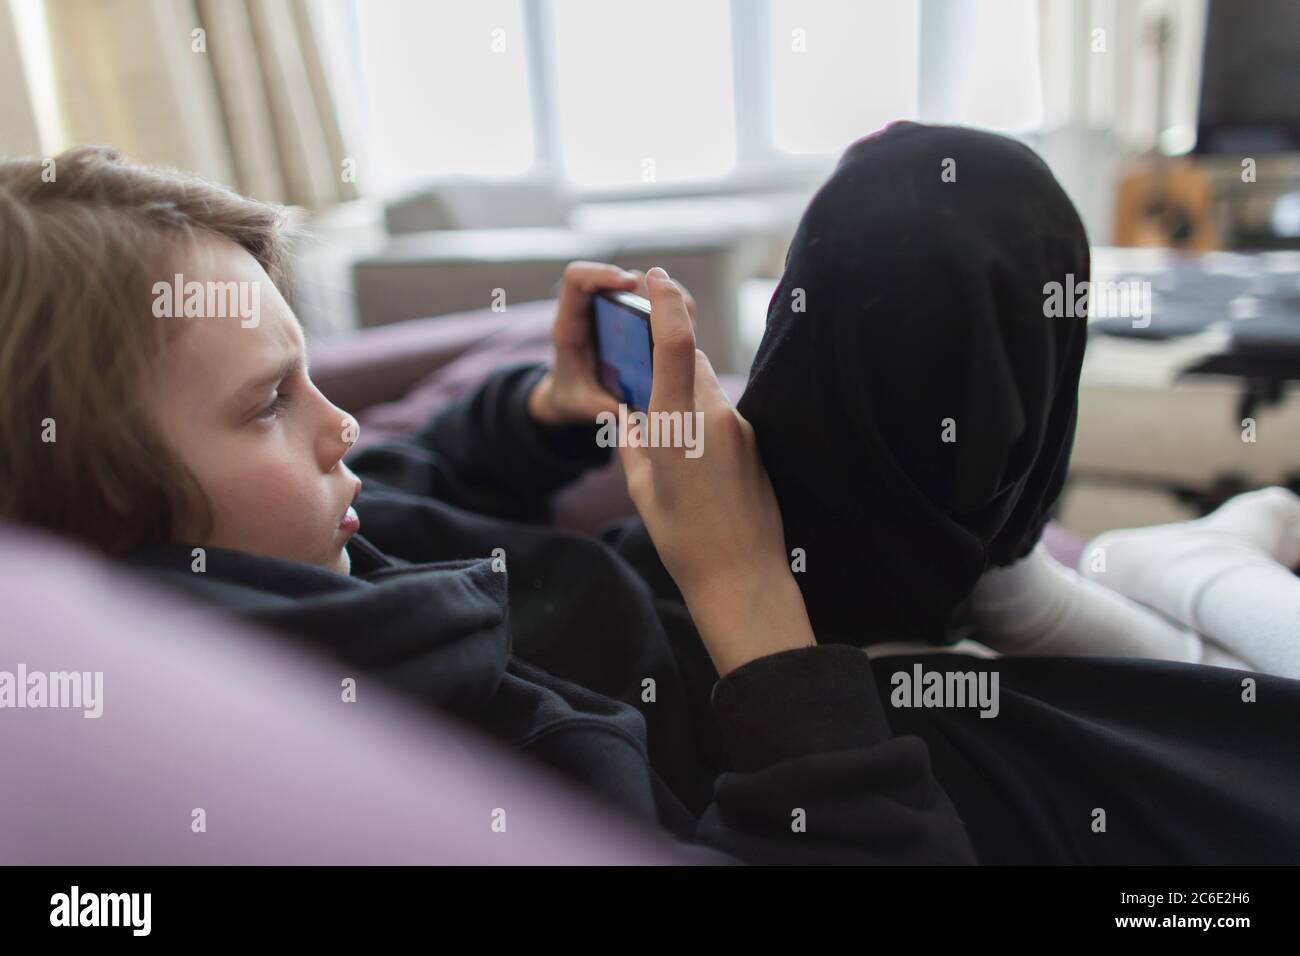 Boy playing video game with smart phone Stock Photo